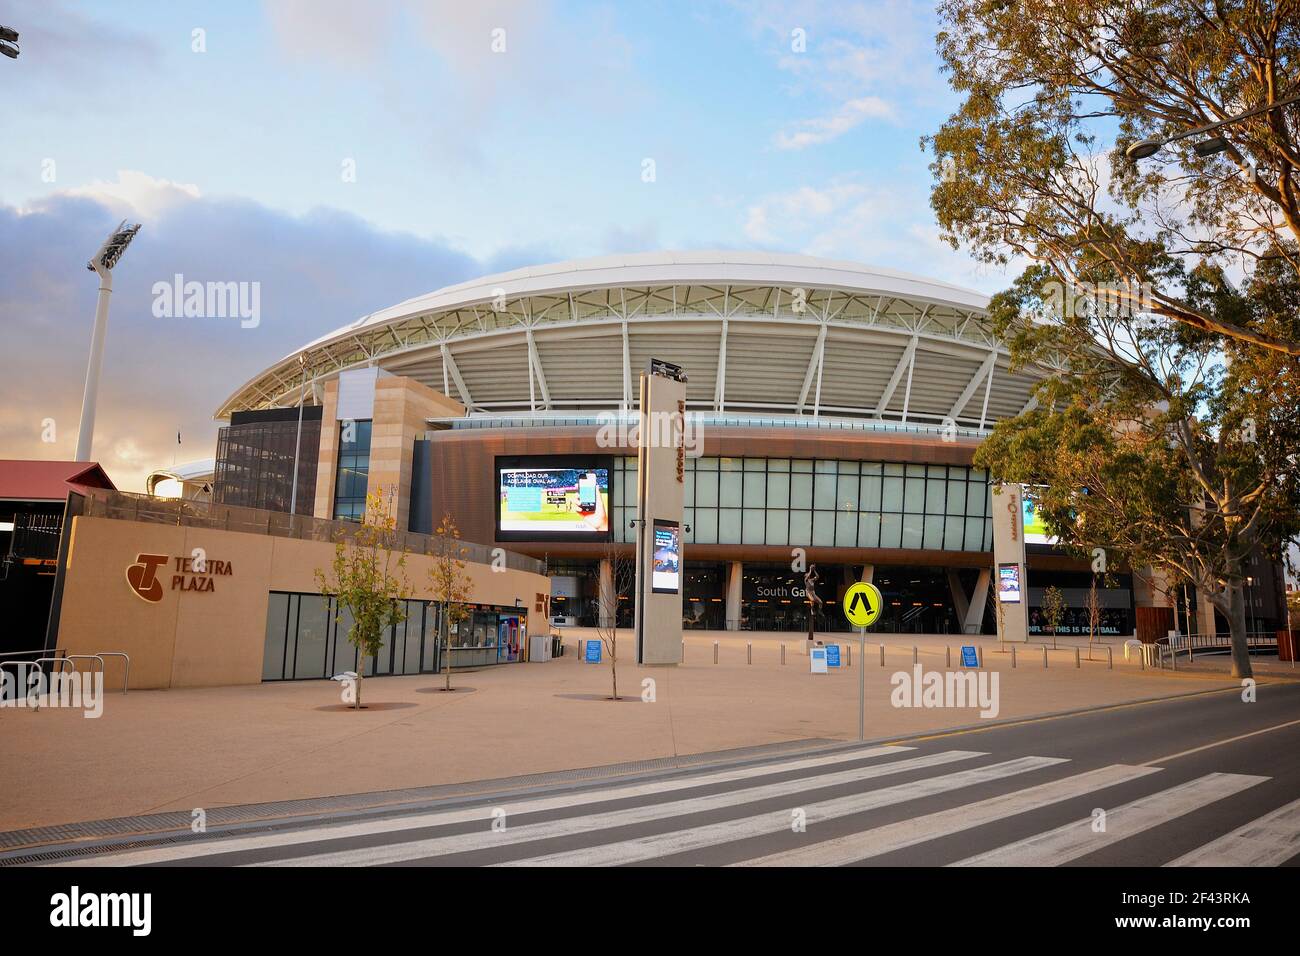 https://c8.alamy.com/comp/2F43RKA/the-south-gate-entrance-to-the-redeveloped-adelaide-oval-which-was-completed-in-march-2014-2F43RKA.jpg